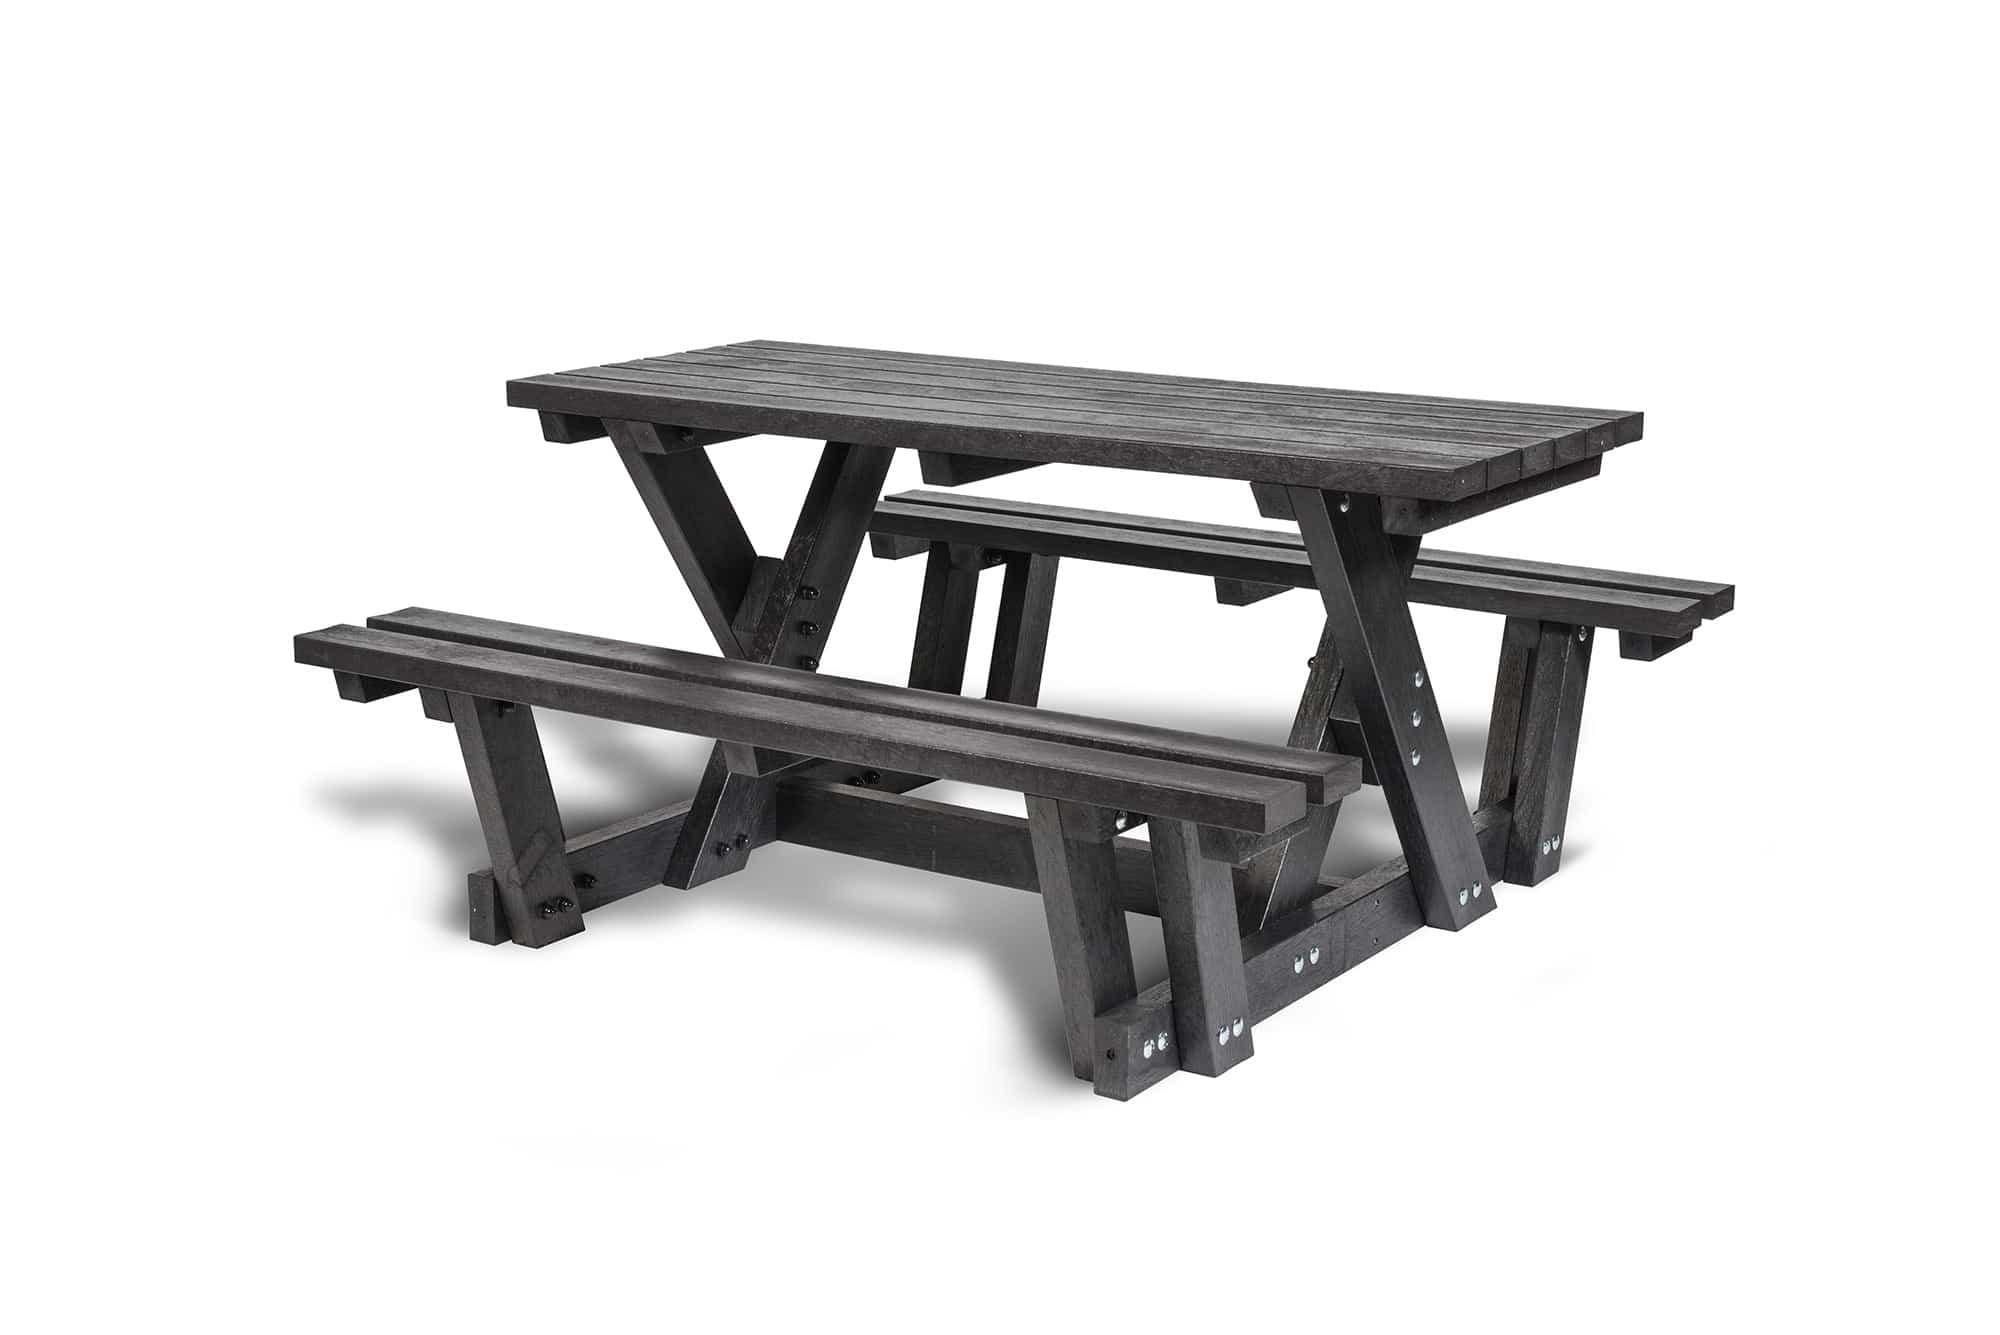 The Batley recycled plastic walkthrough picnic table is part of our accessibility range, seen here in black